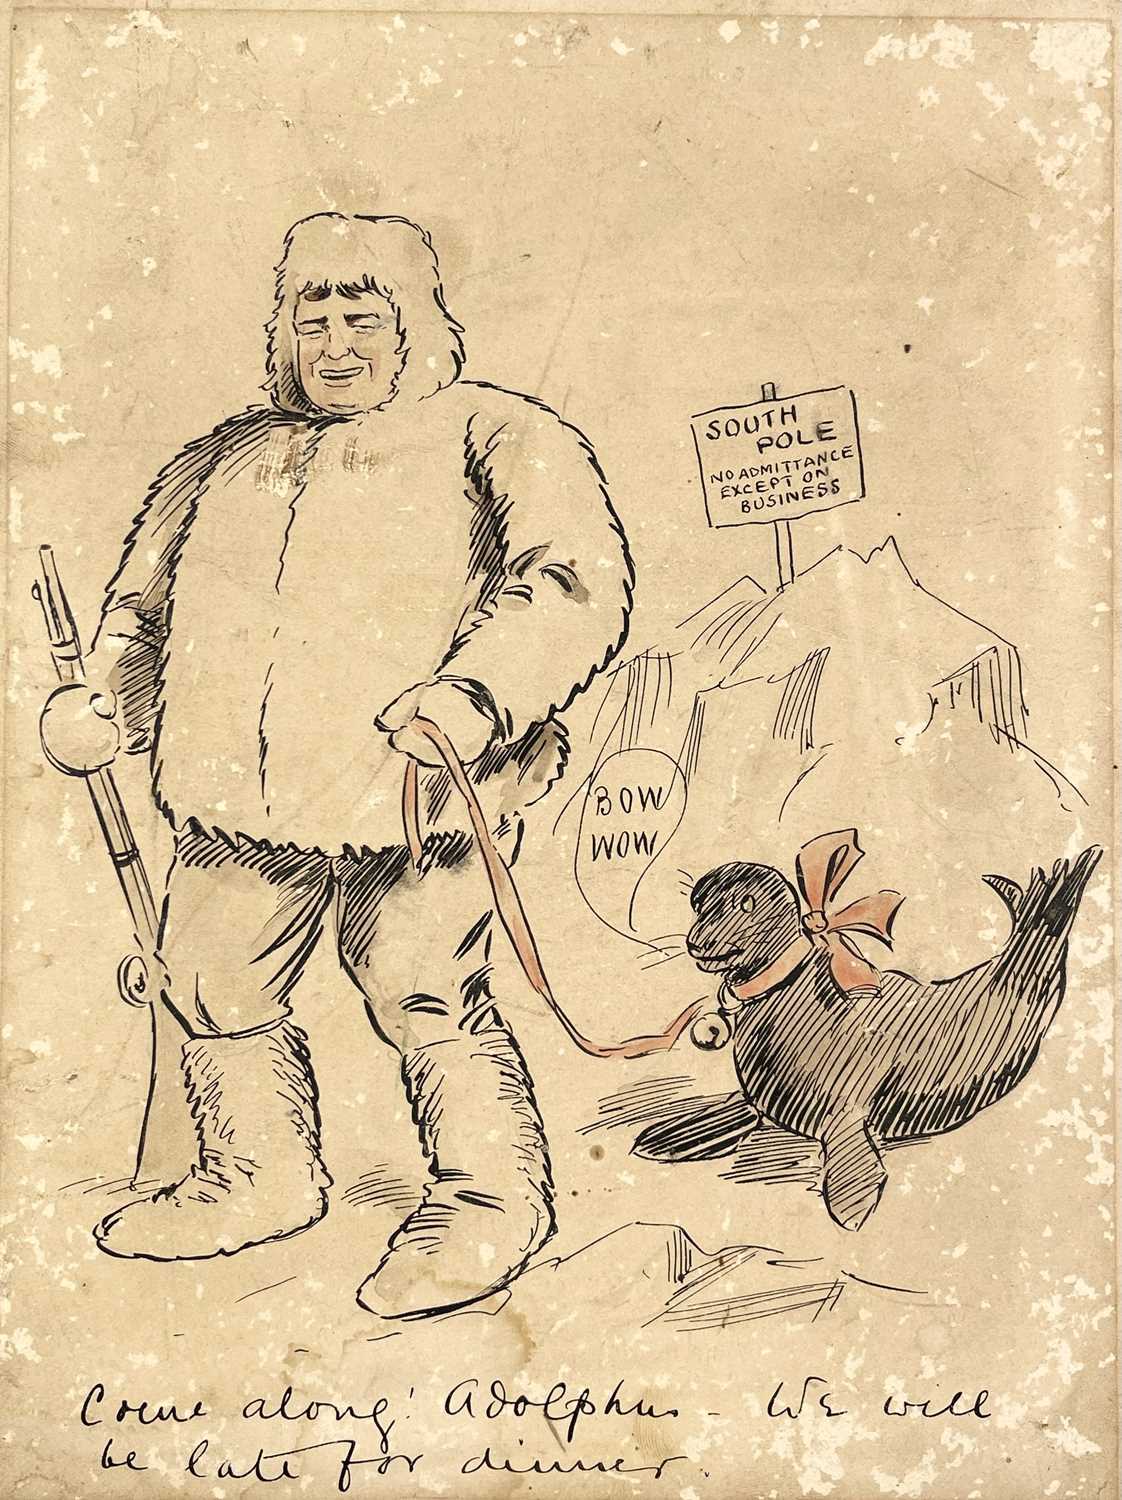 A humorous early twentieth century pen and ink sketch, inscribed 'Come along! Adolphus - we will